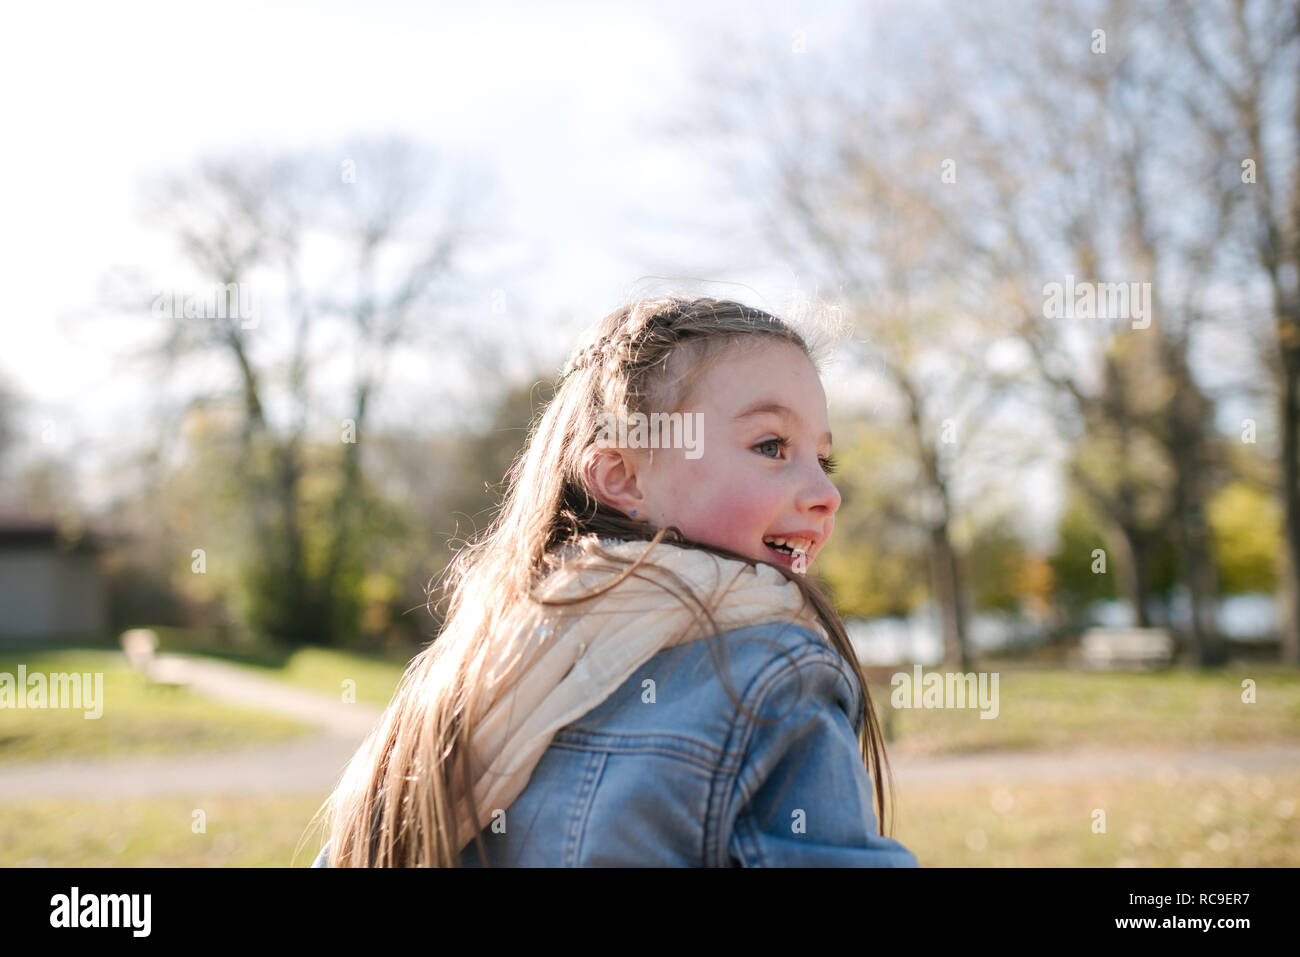 Little girl playing in park Stock Photo